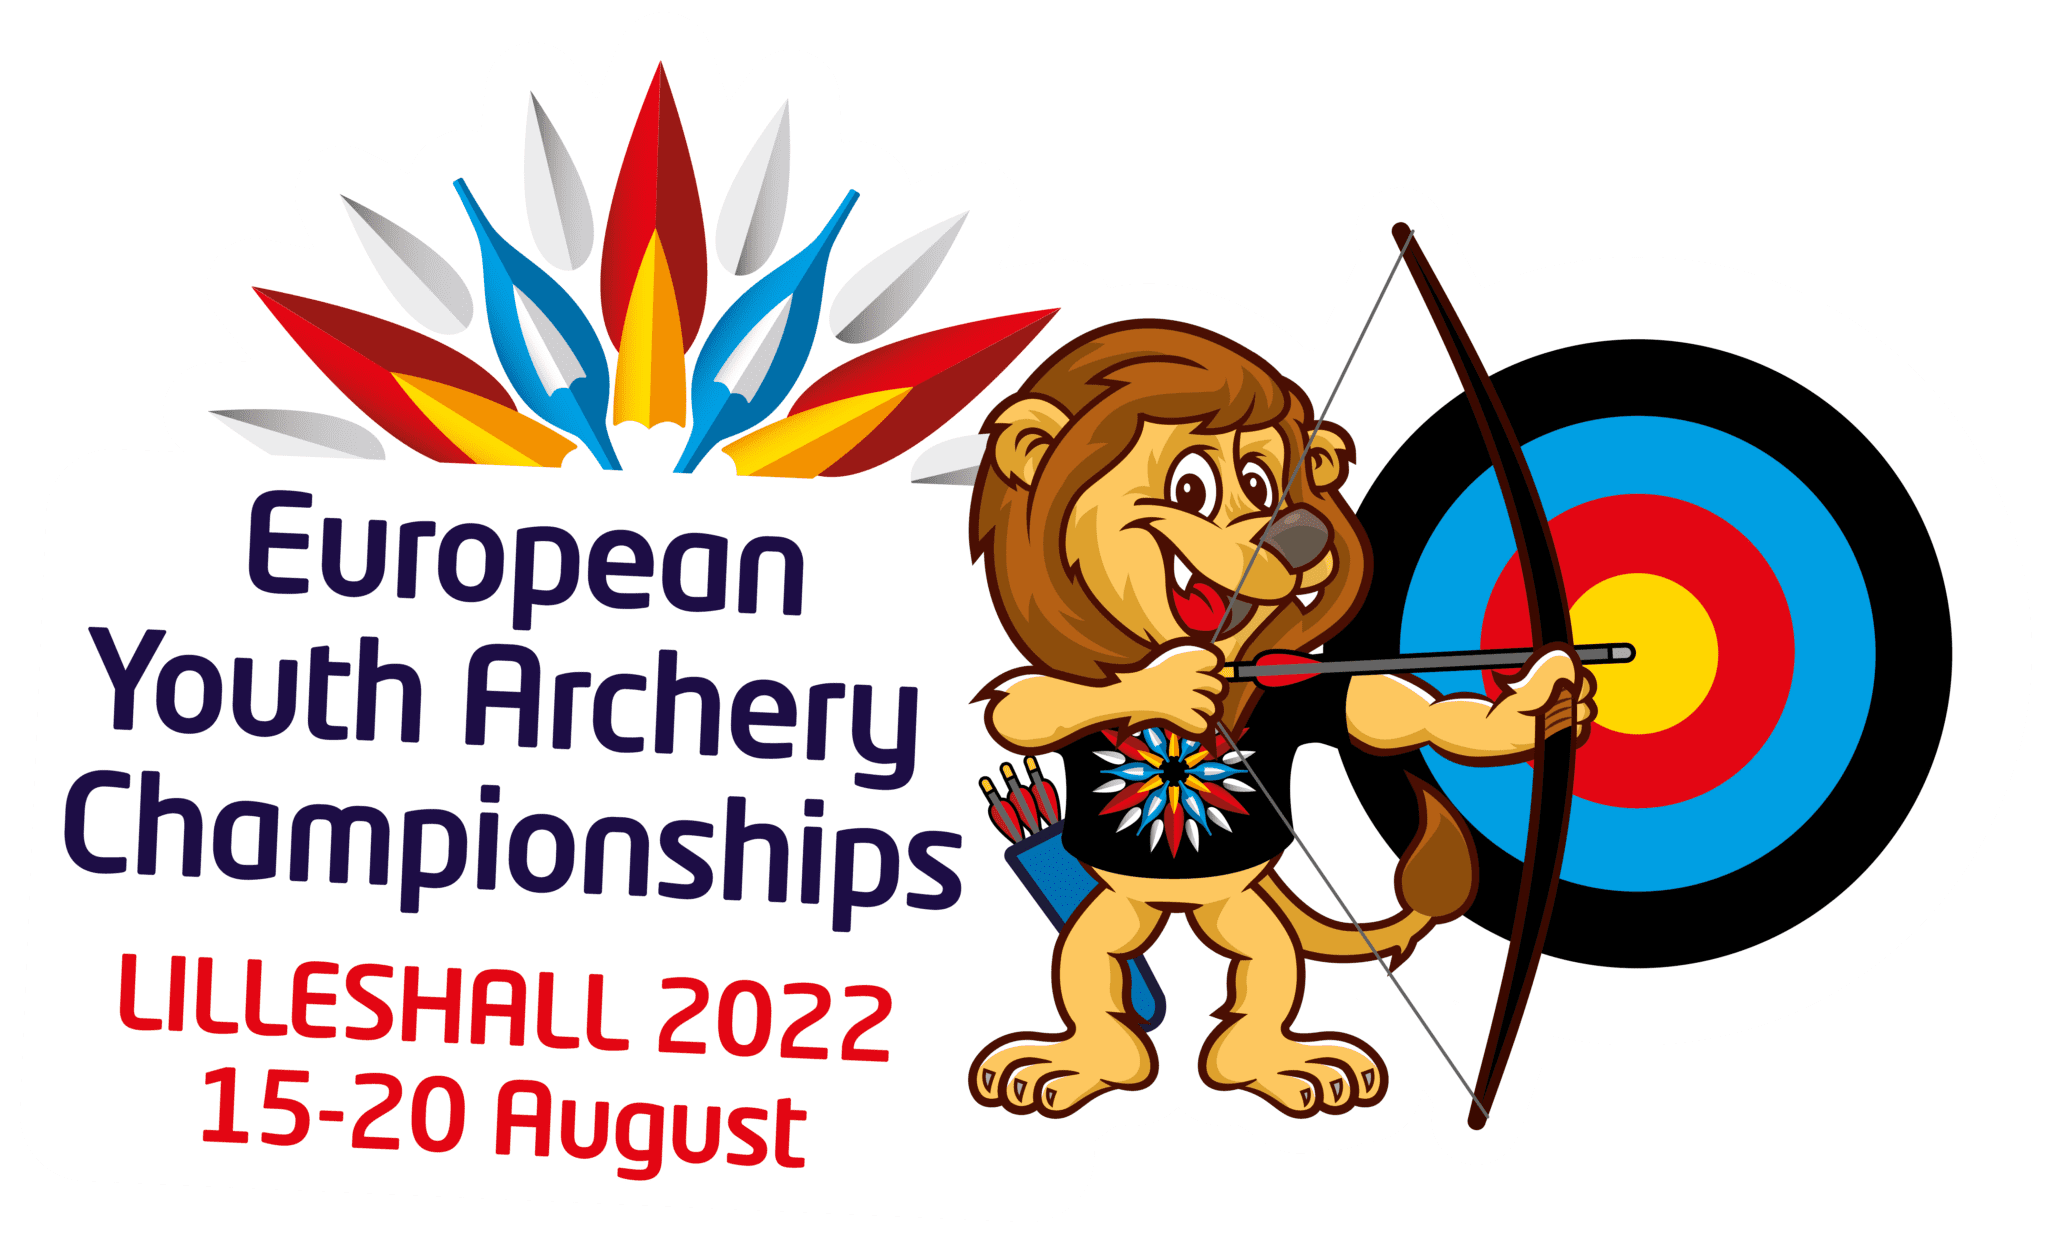 European Youth Archery Championships: Tickets on sale now